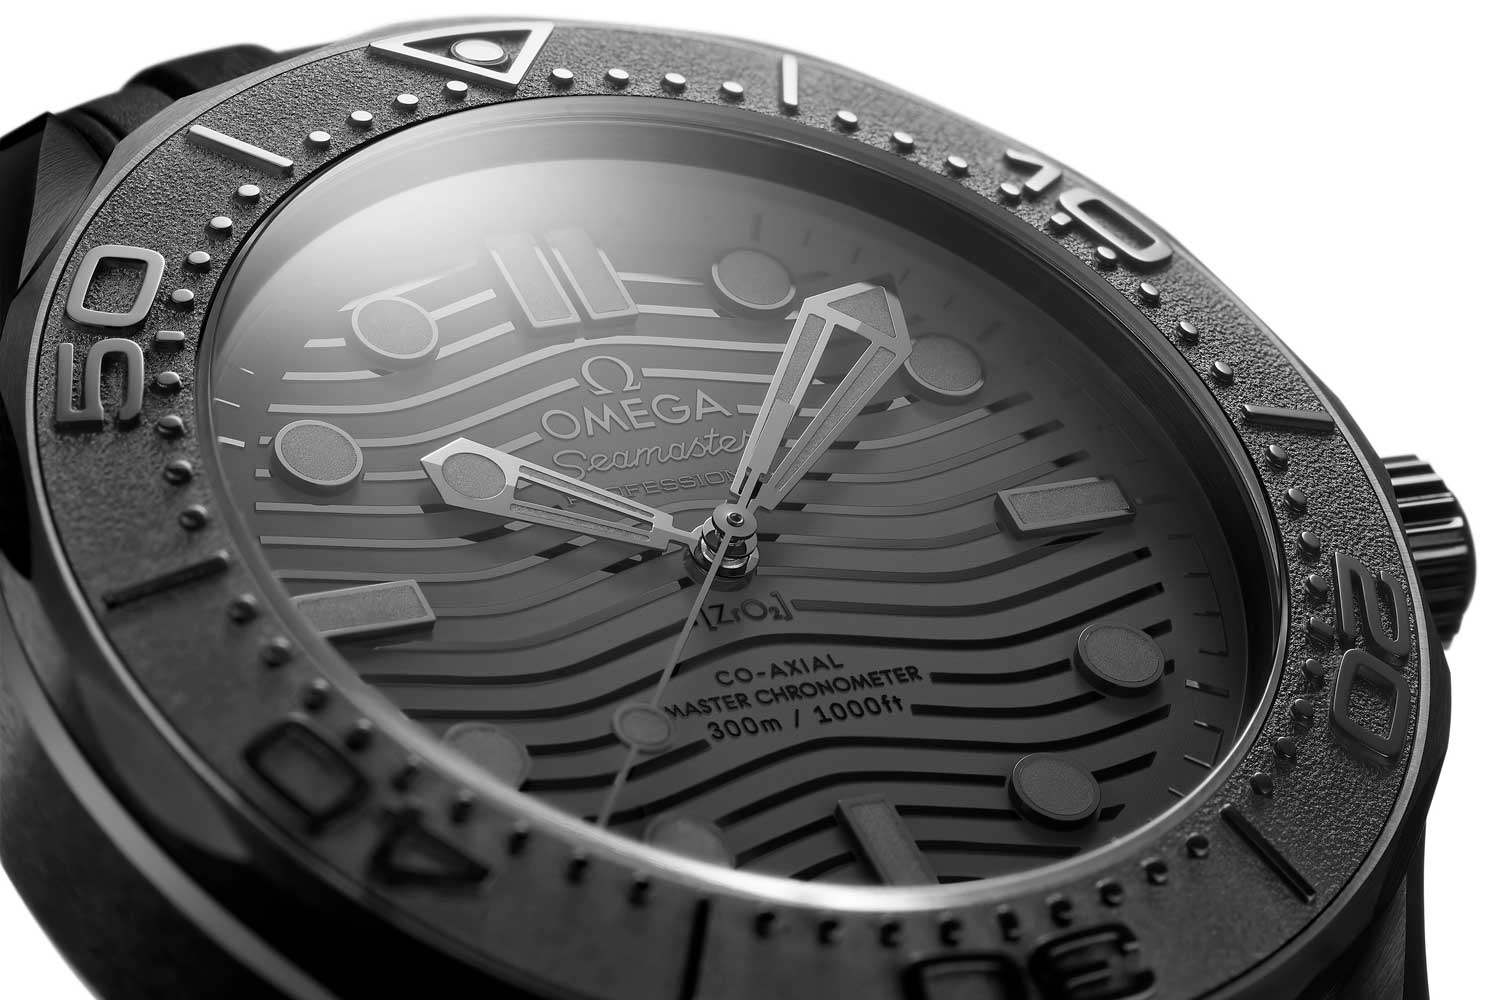 The Black Black Diver 300 exhibits an incredible variety in tones of black to create truly remarkable visibility and legibility.